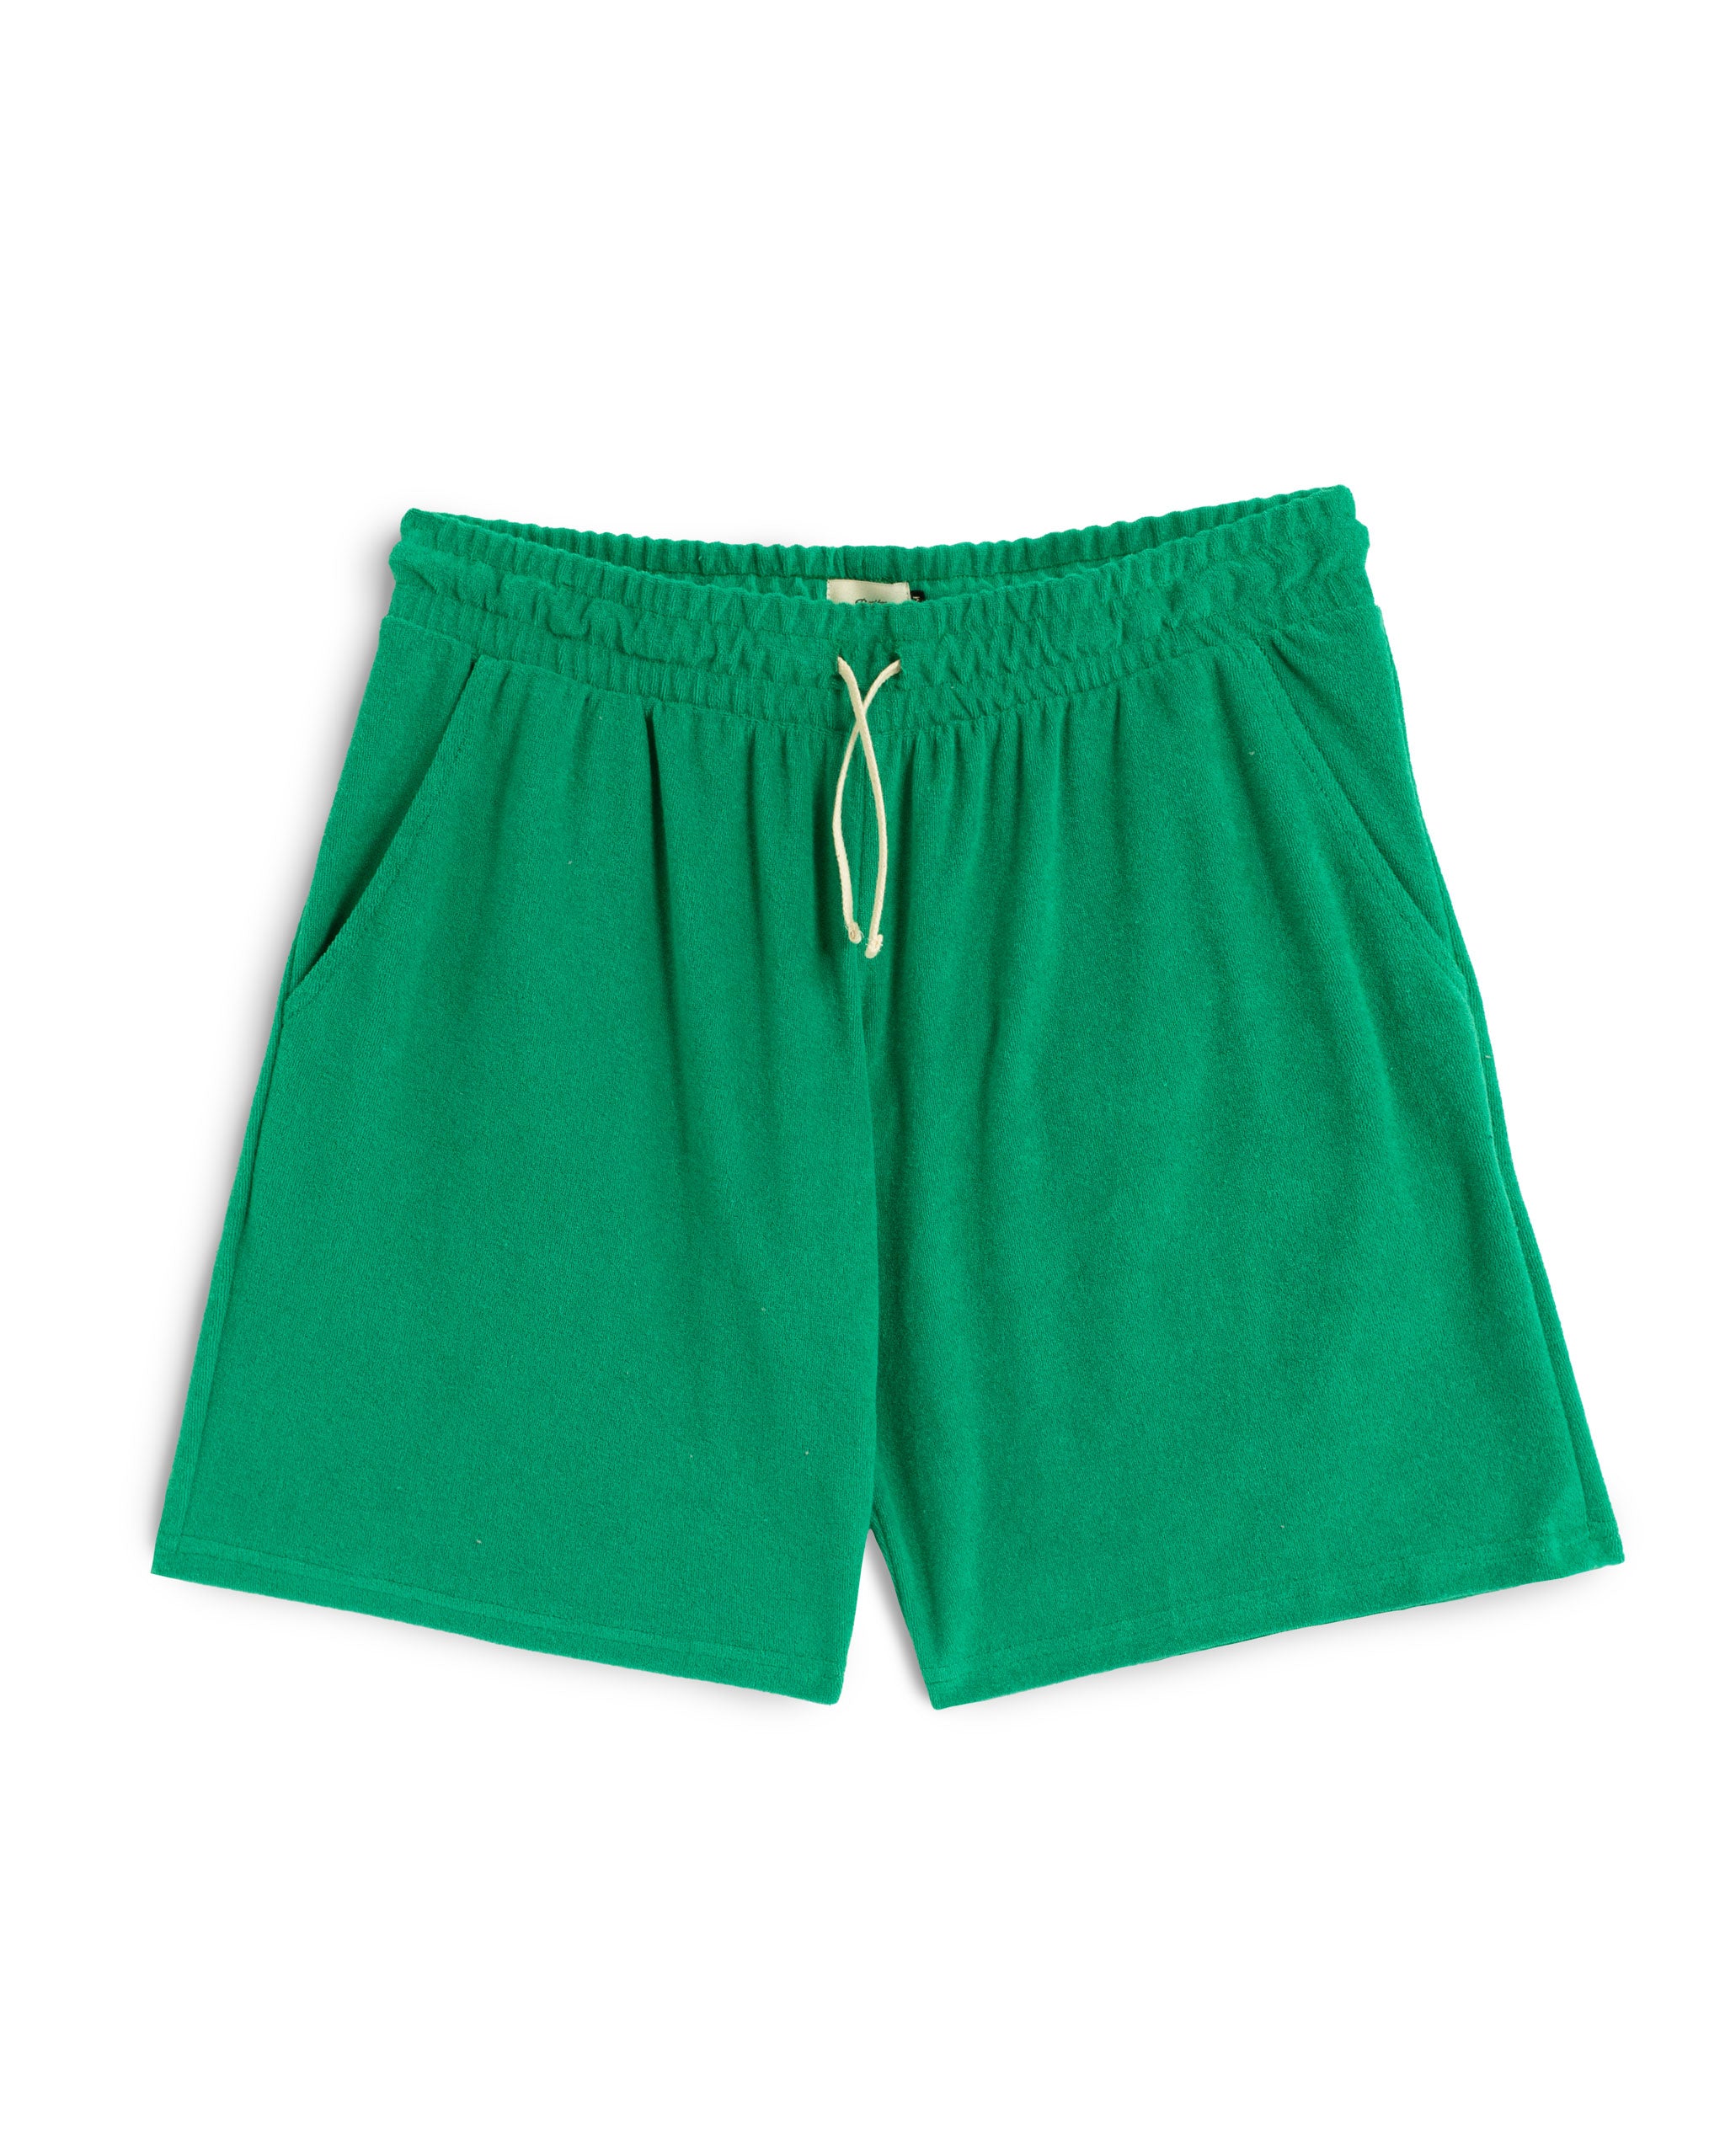 Solid Green Towel Terry Cotton Sweat Shorts